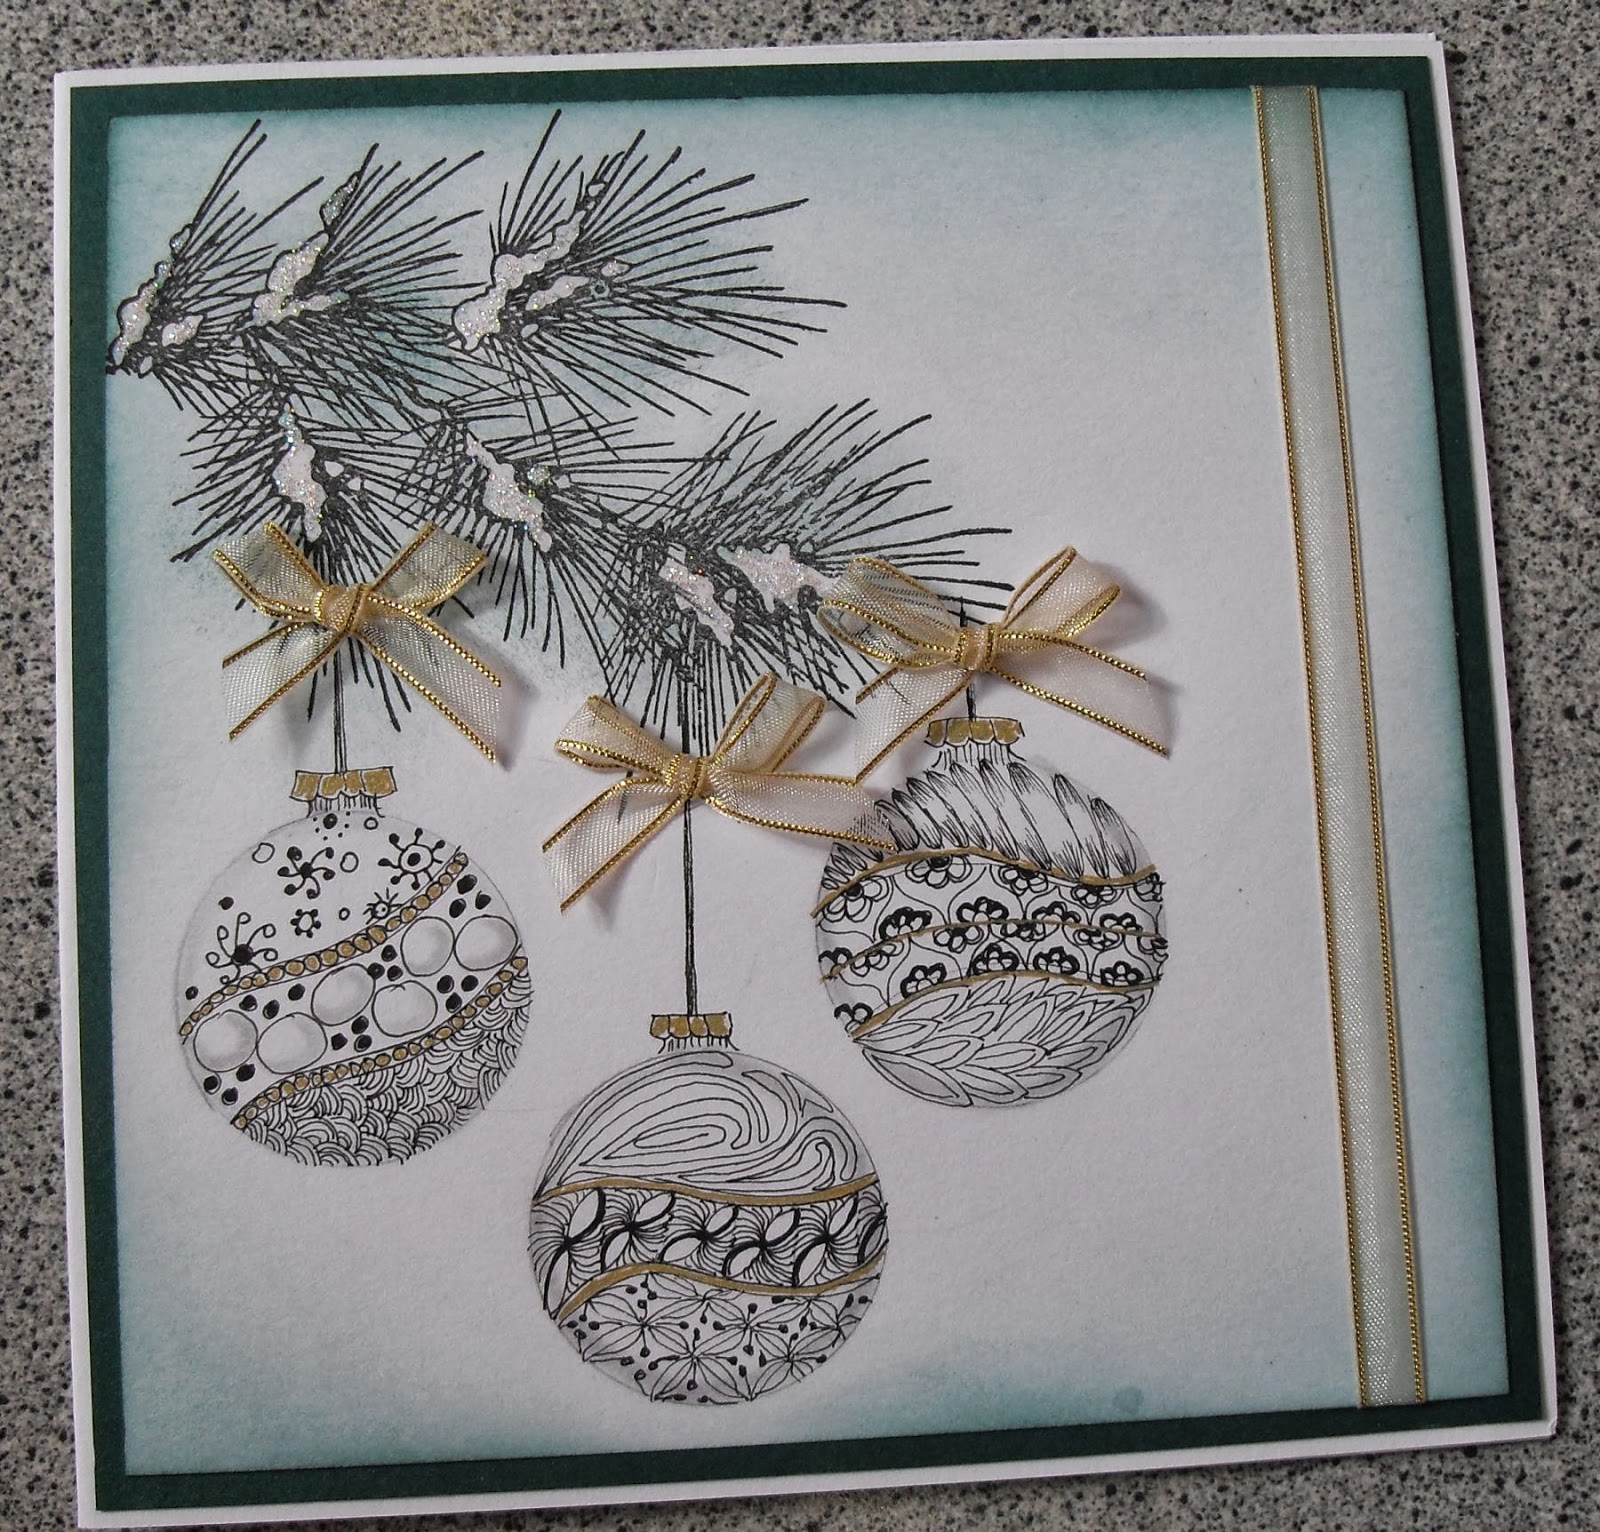 S & D Card Crafts: My Zentangle cards